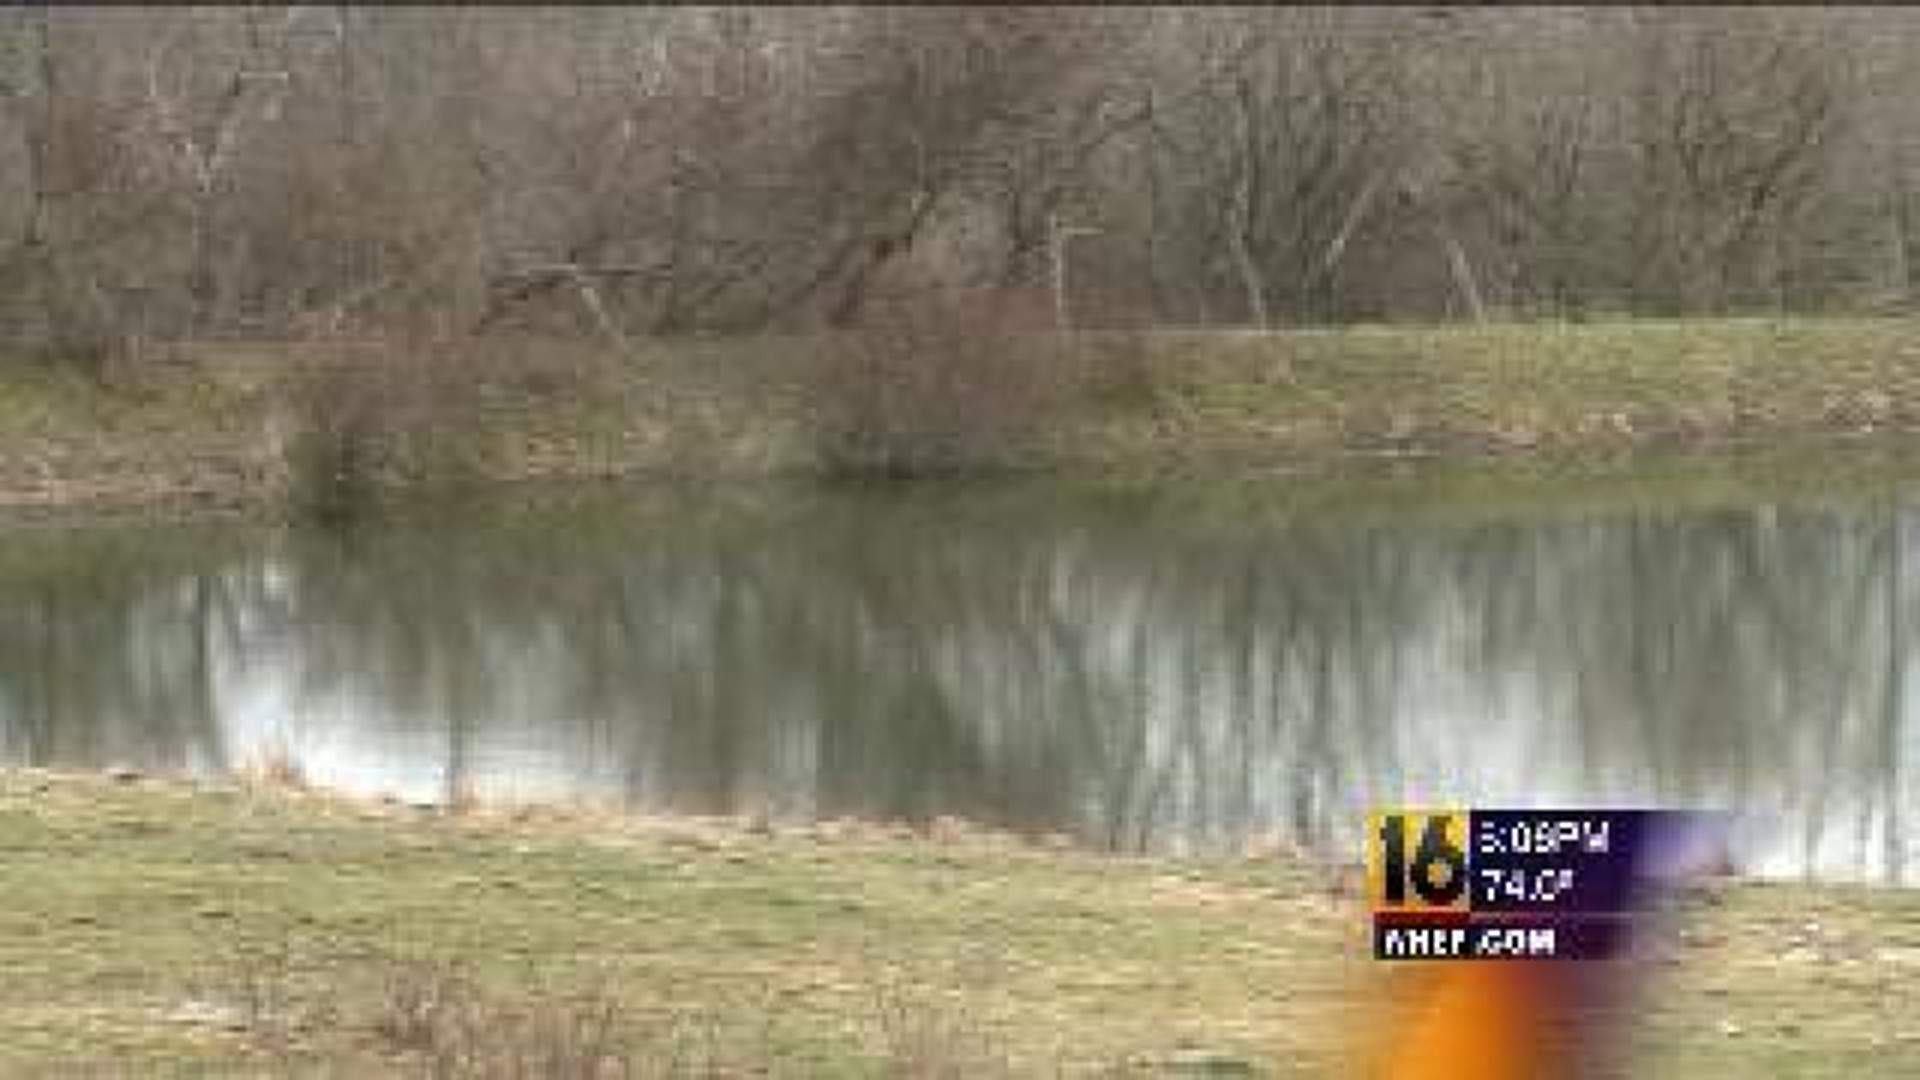 Dead Cows in Pond Cause Concern